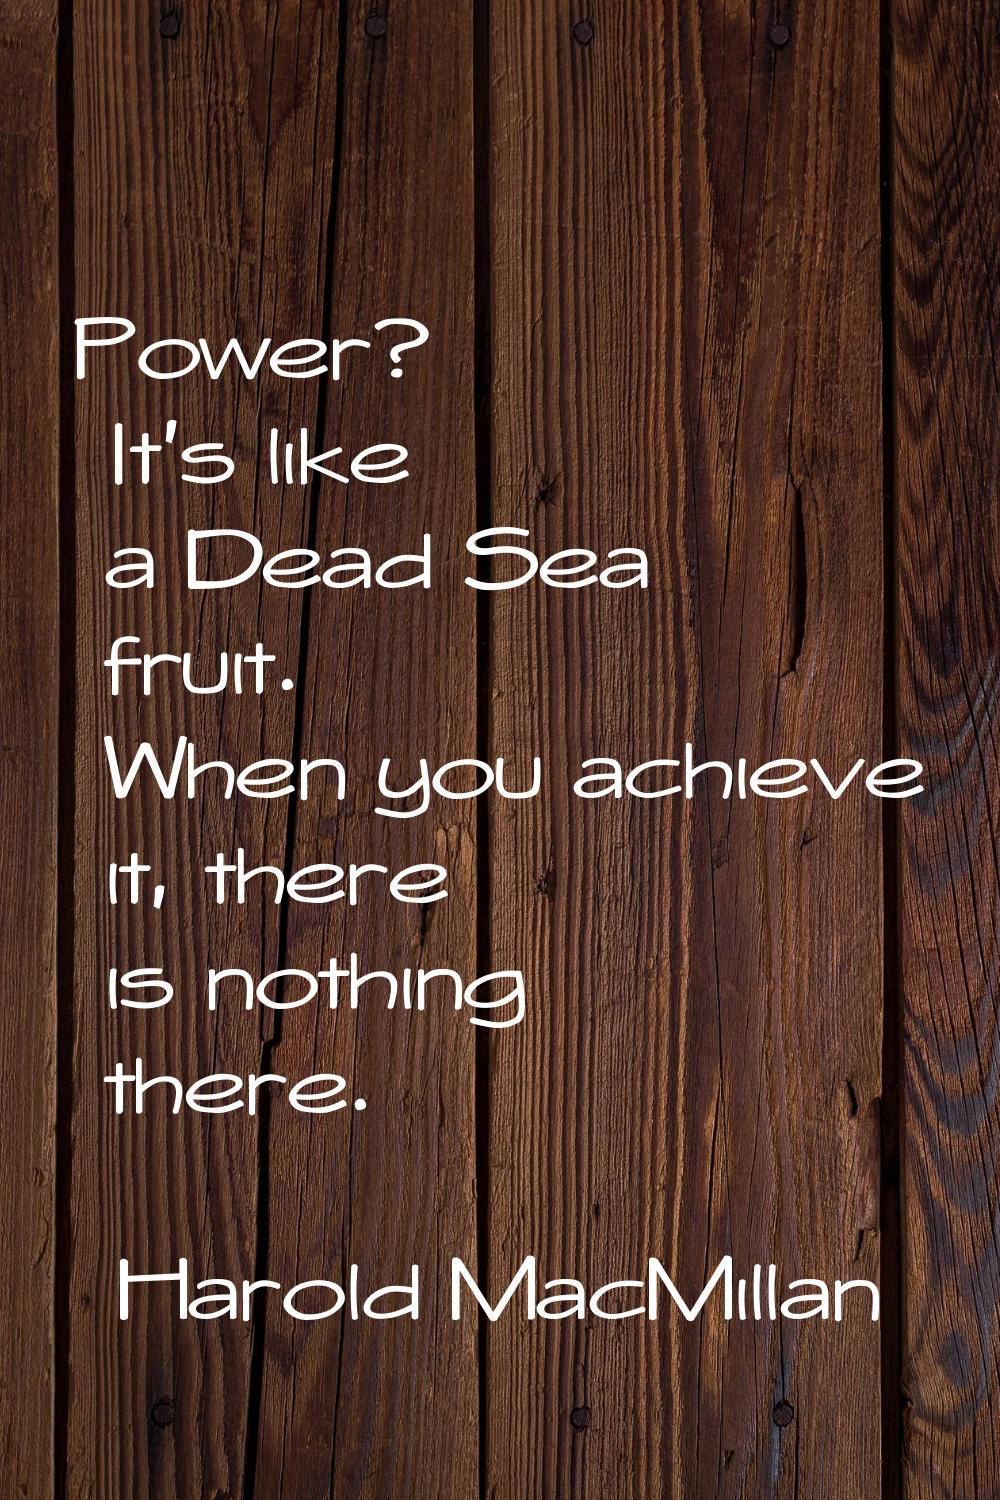 Power? It's like a Dead Sea fruit. When you achieve it, there is nothing there.